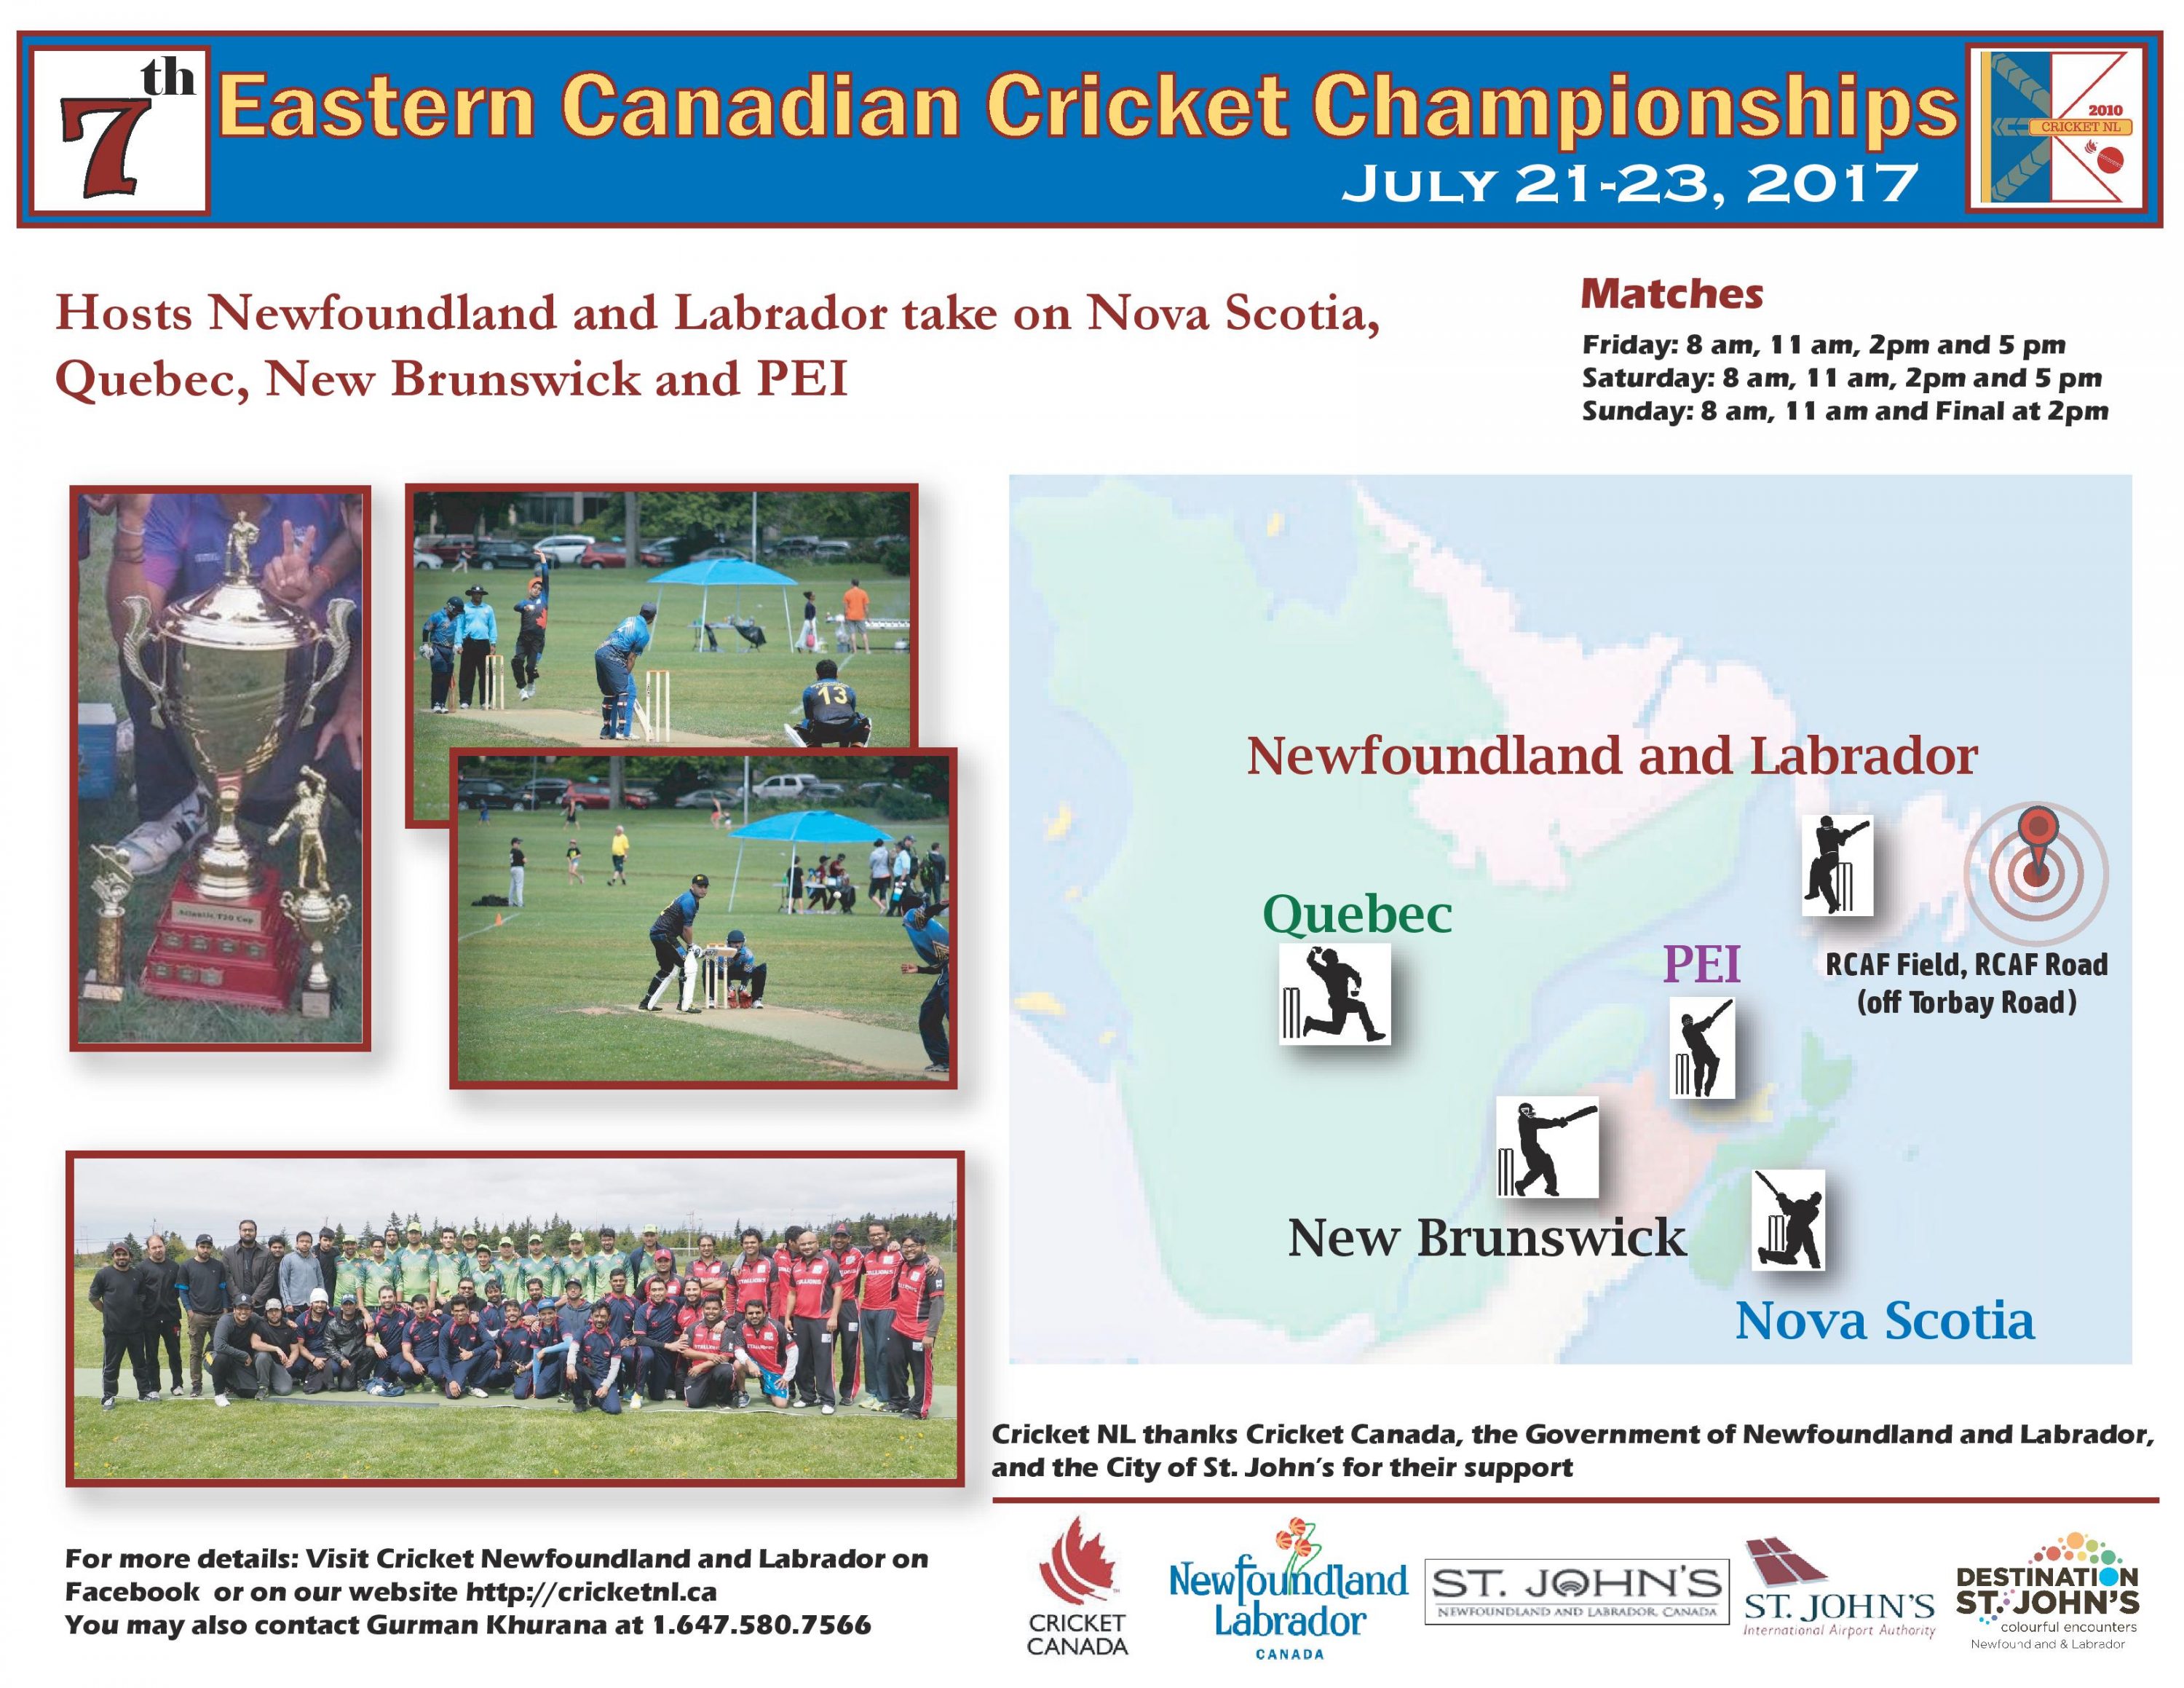 Eastern Canadian cricket championships to come to St. John’s